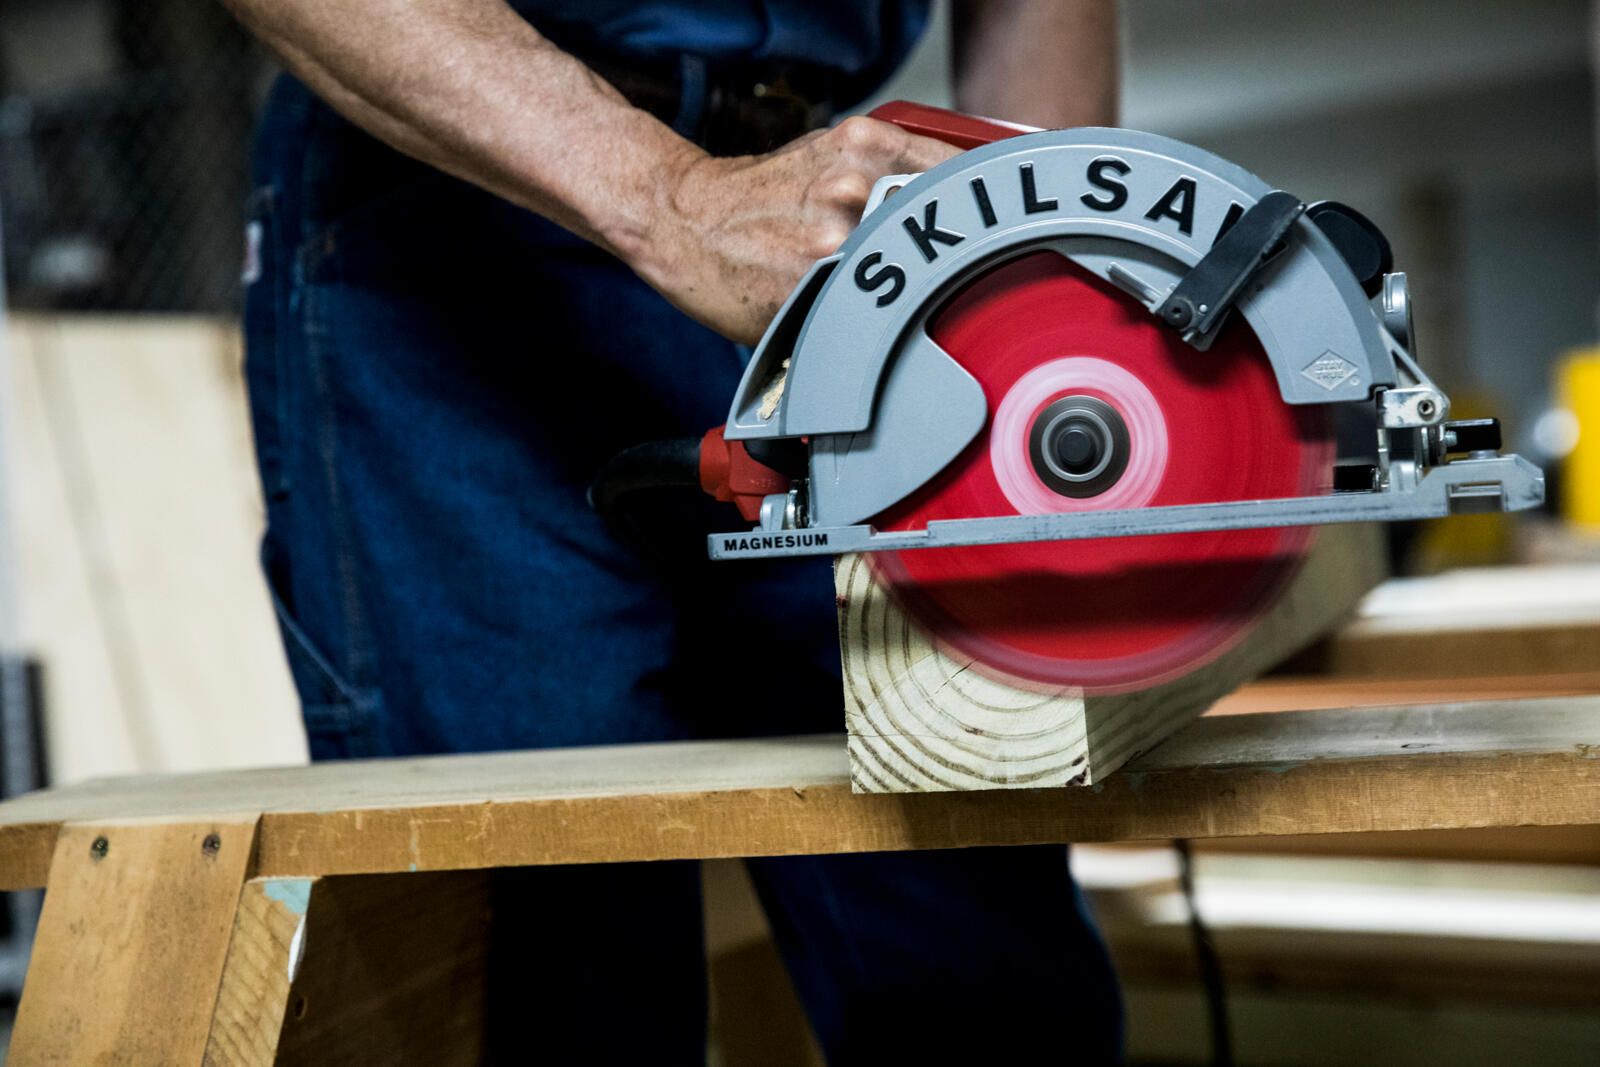 How to Use a Circular Saw Power Tool Safety